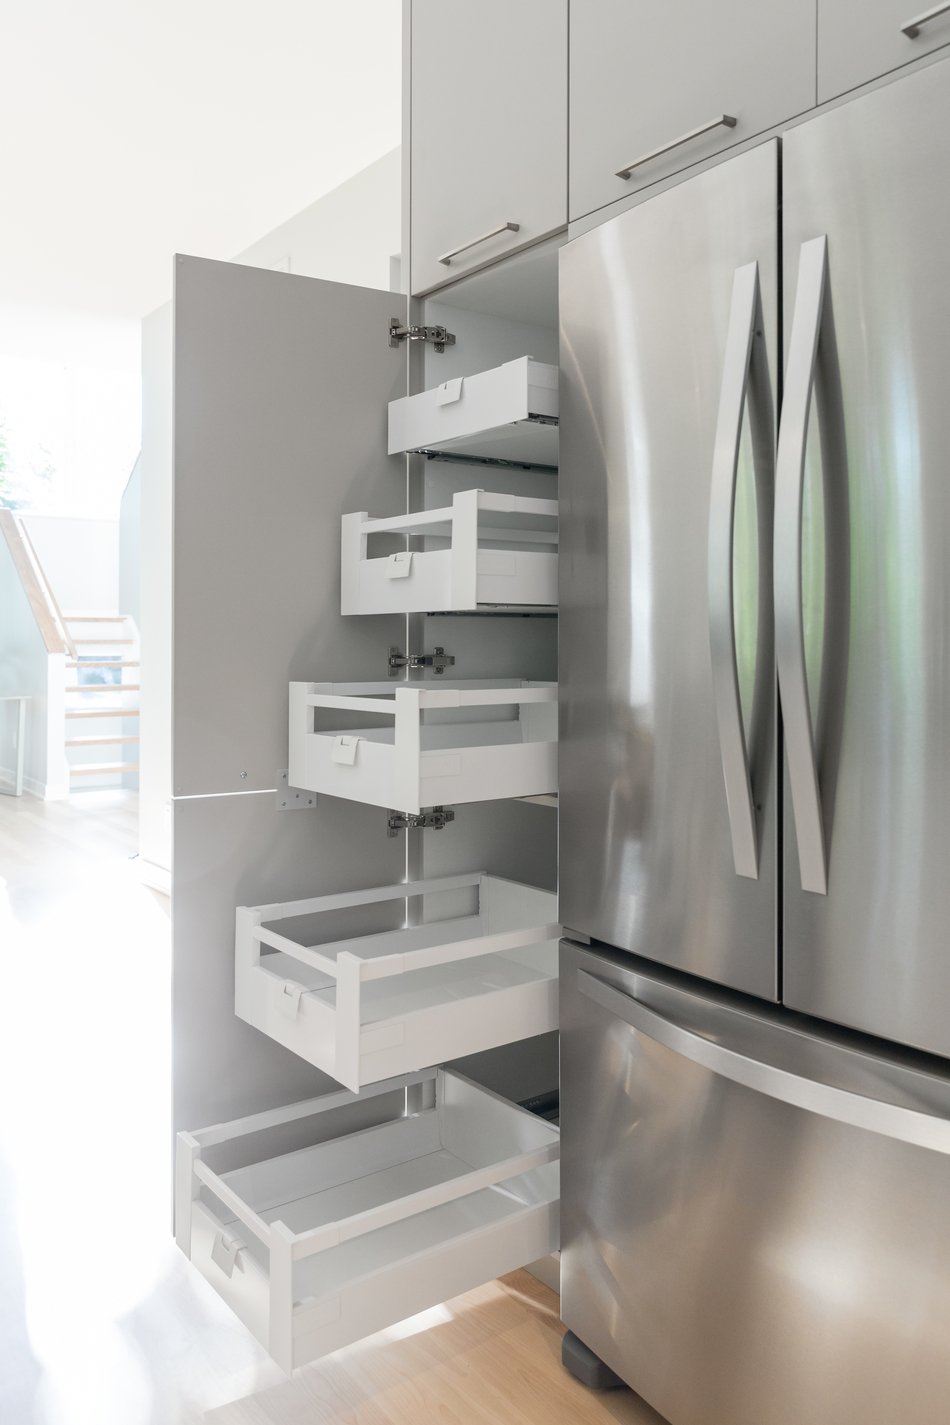 5 Clever Ways to Hide Your Kitchen Appliances